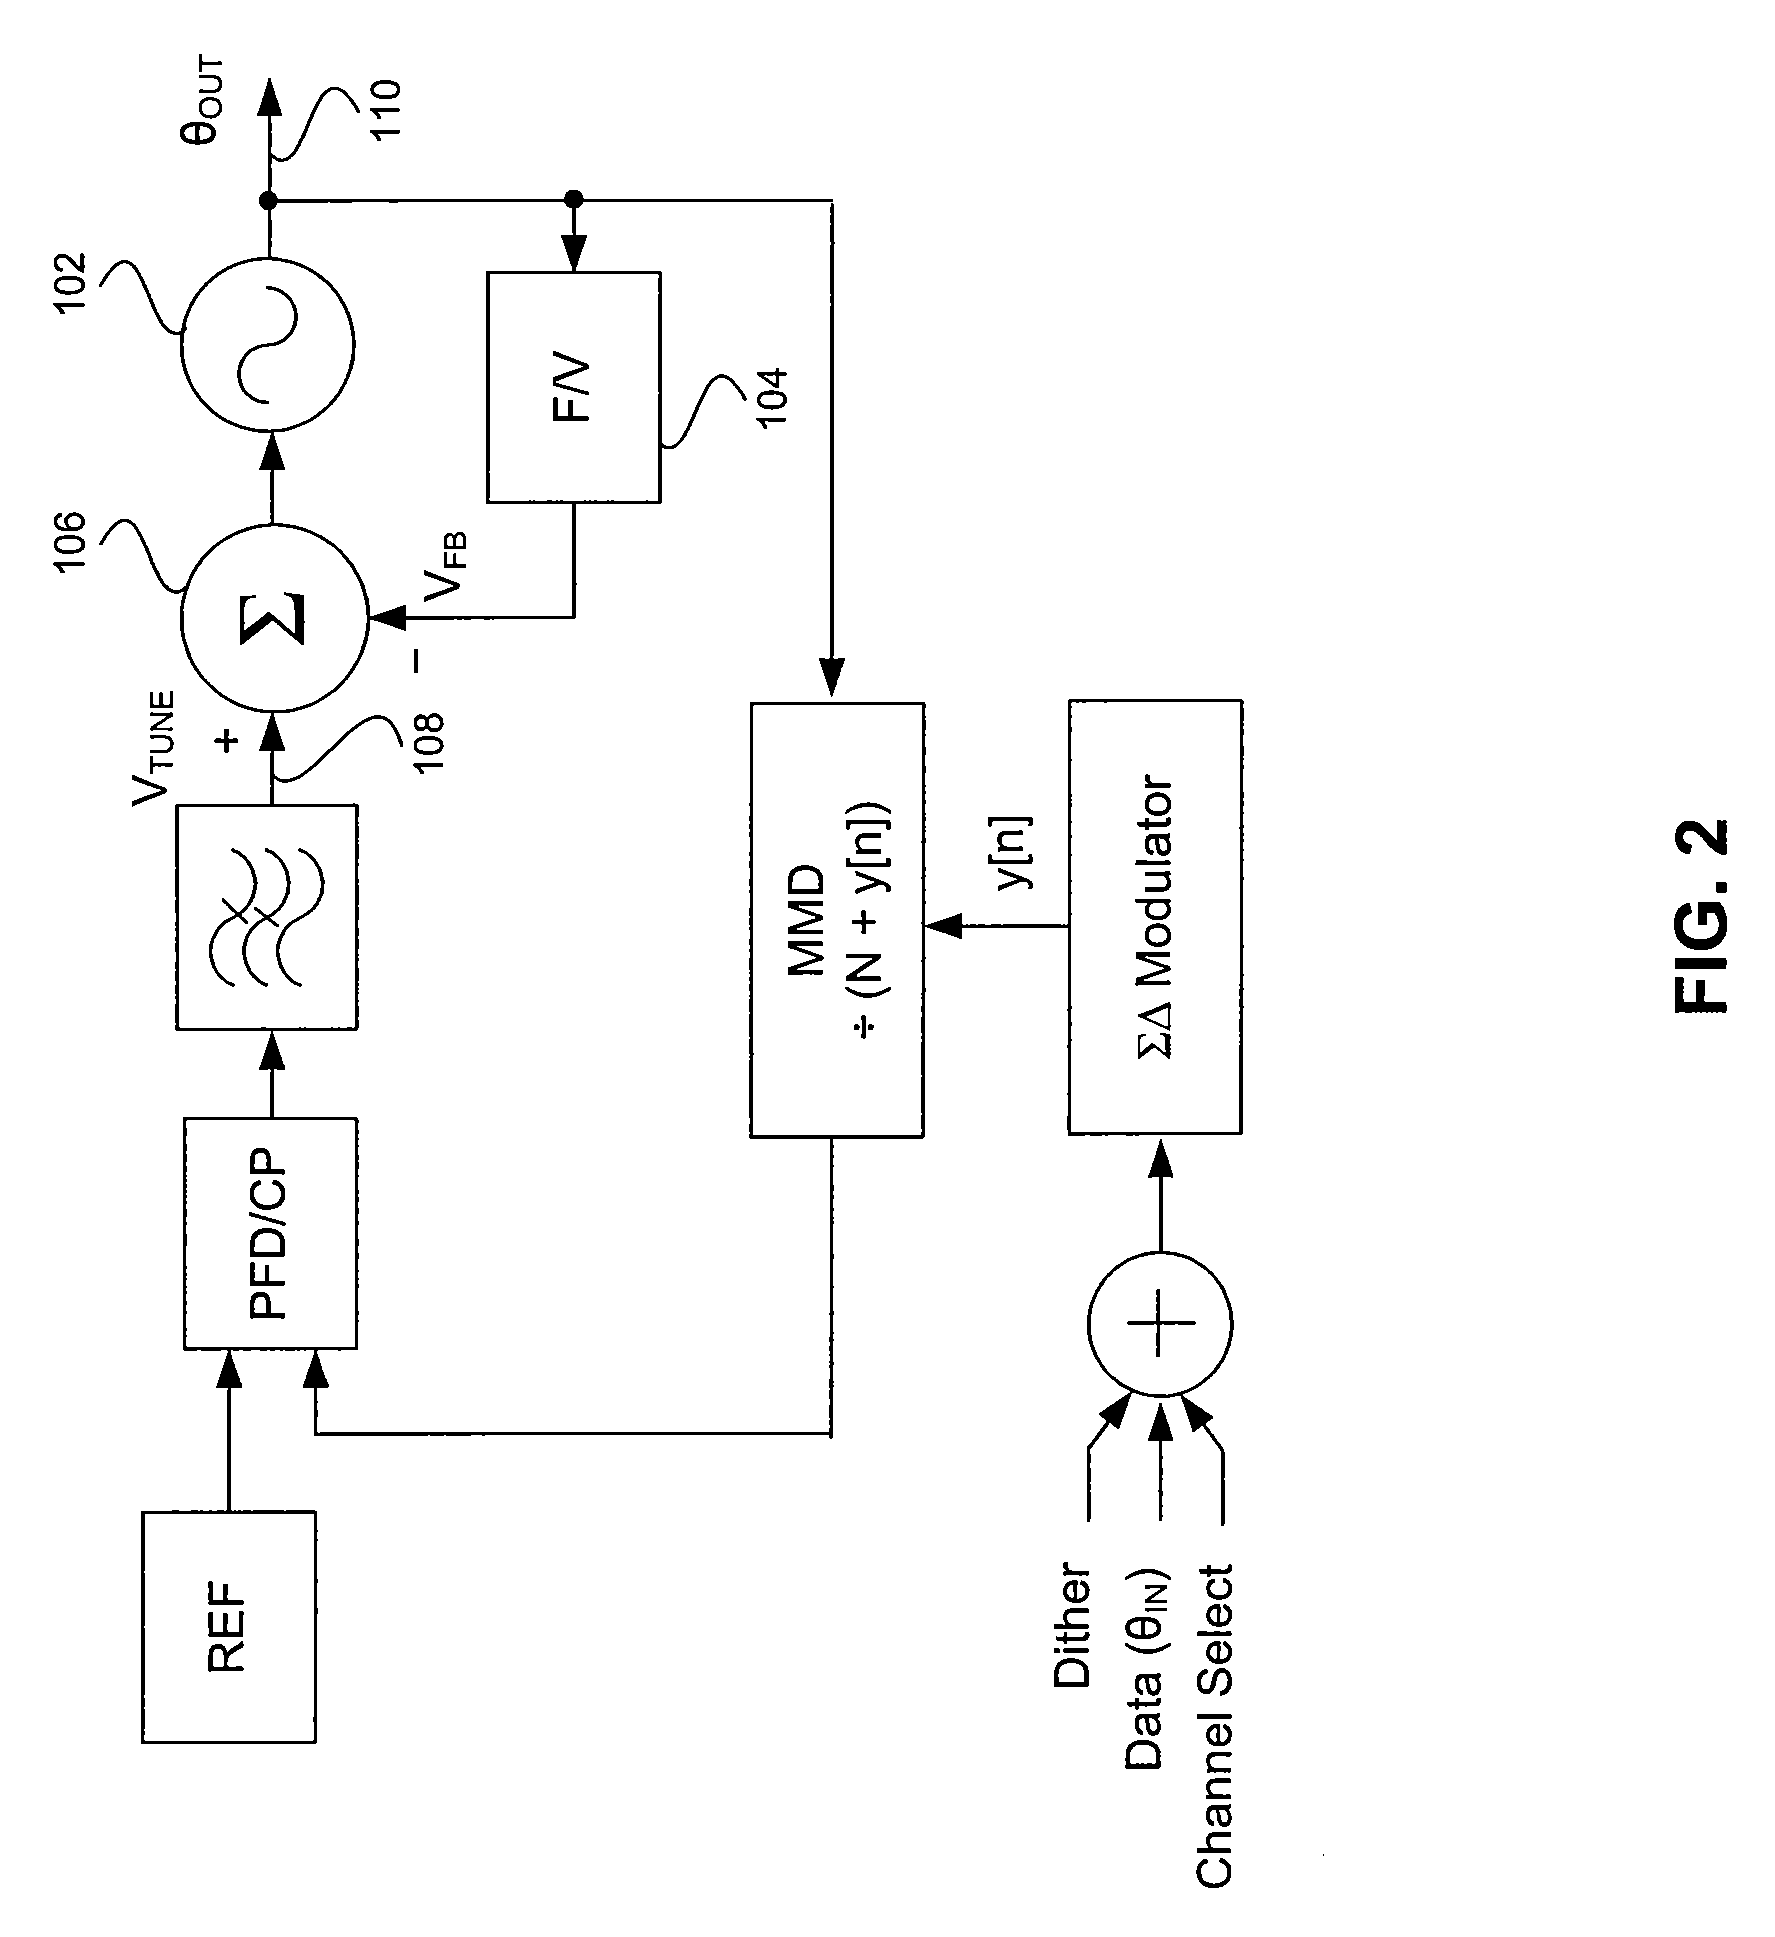 Feedback-based linearization of voltage controlled oscillator